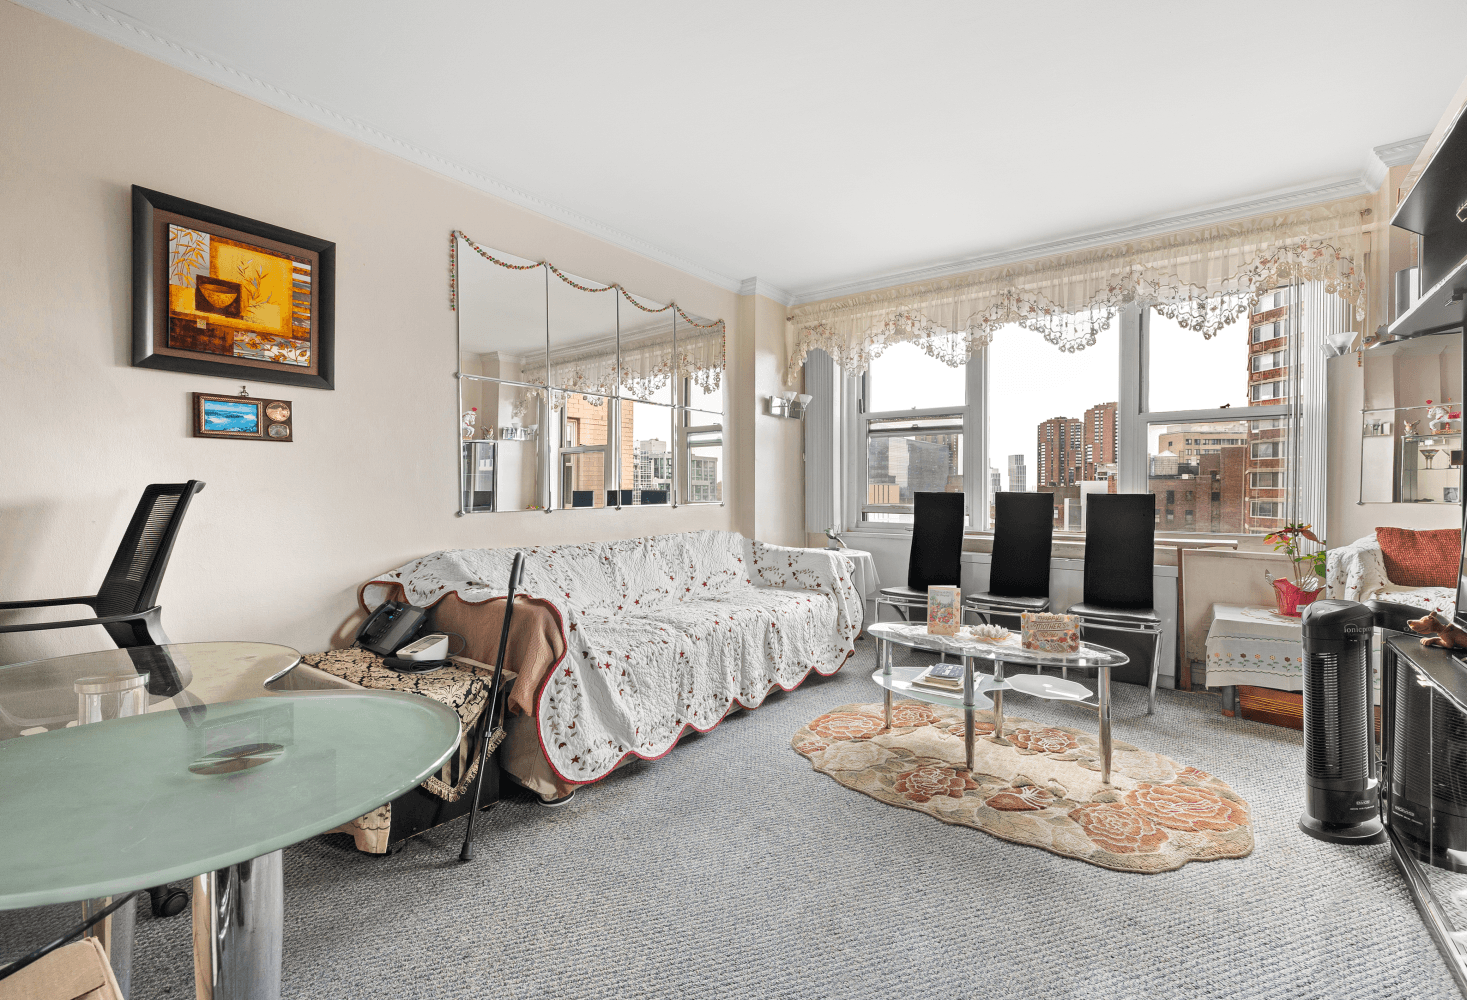 Welcome to 305 East 24th Street 18K, a stunning apartment nestled in the vibrant Kips Bay Gramercy section of NYC, where luxury meets convenience in the heart of the city.